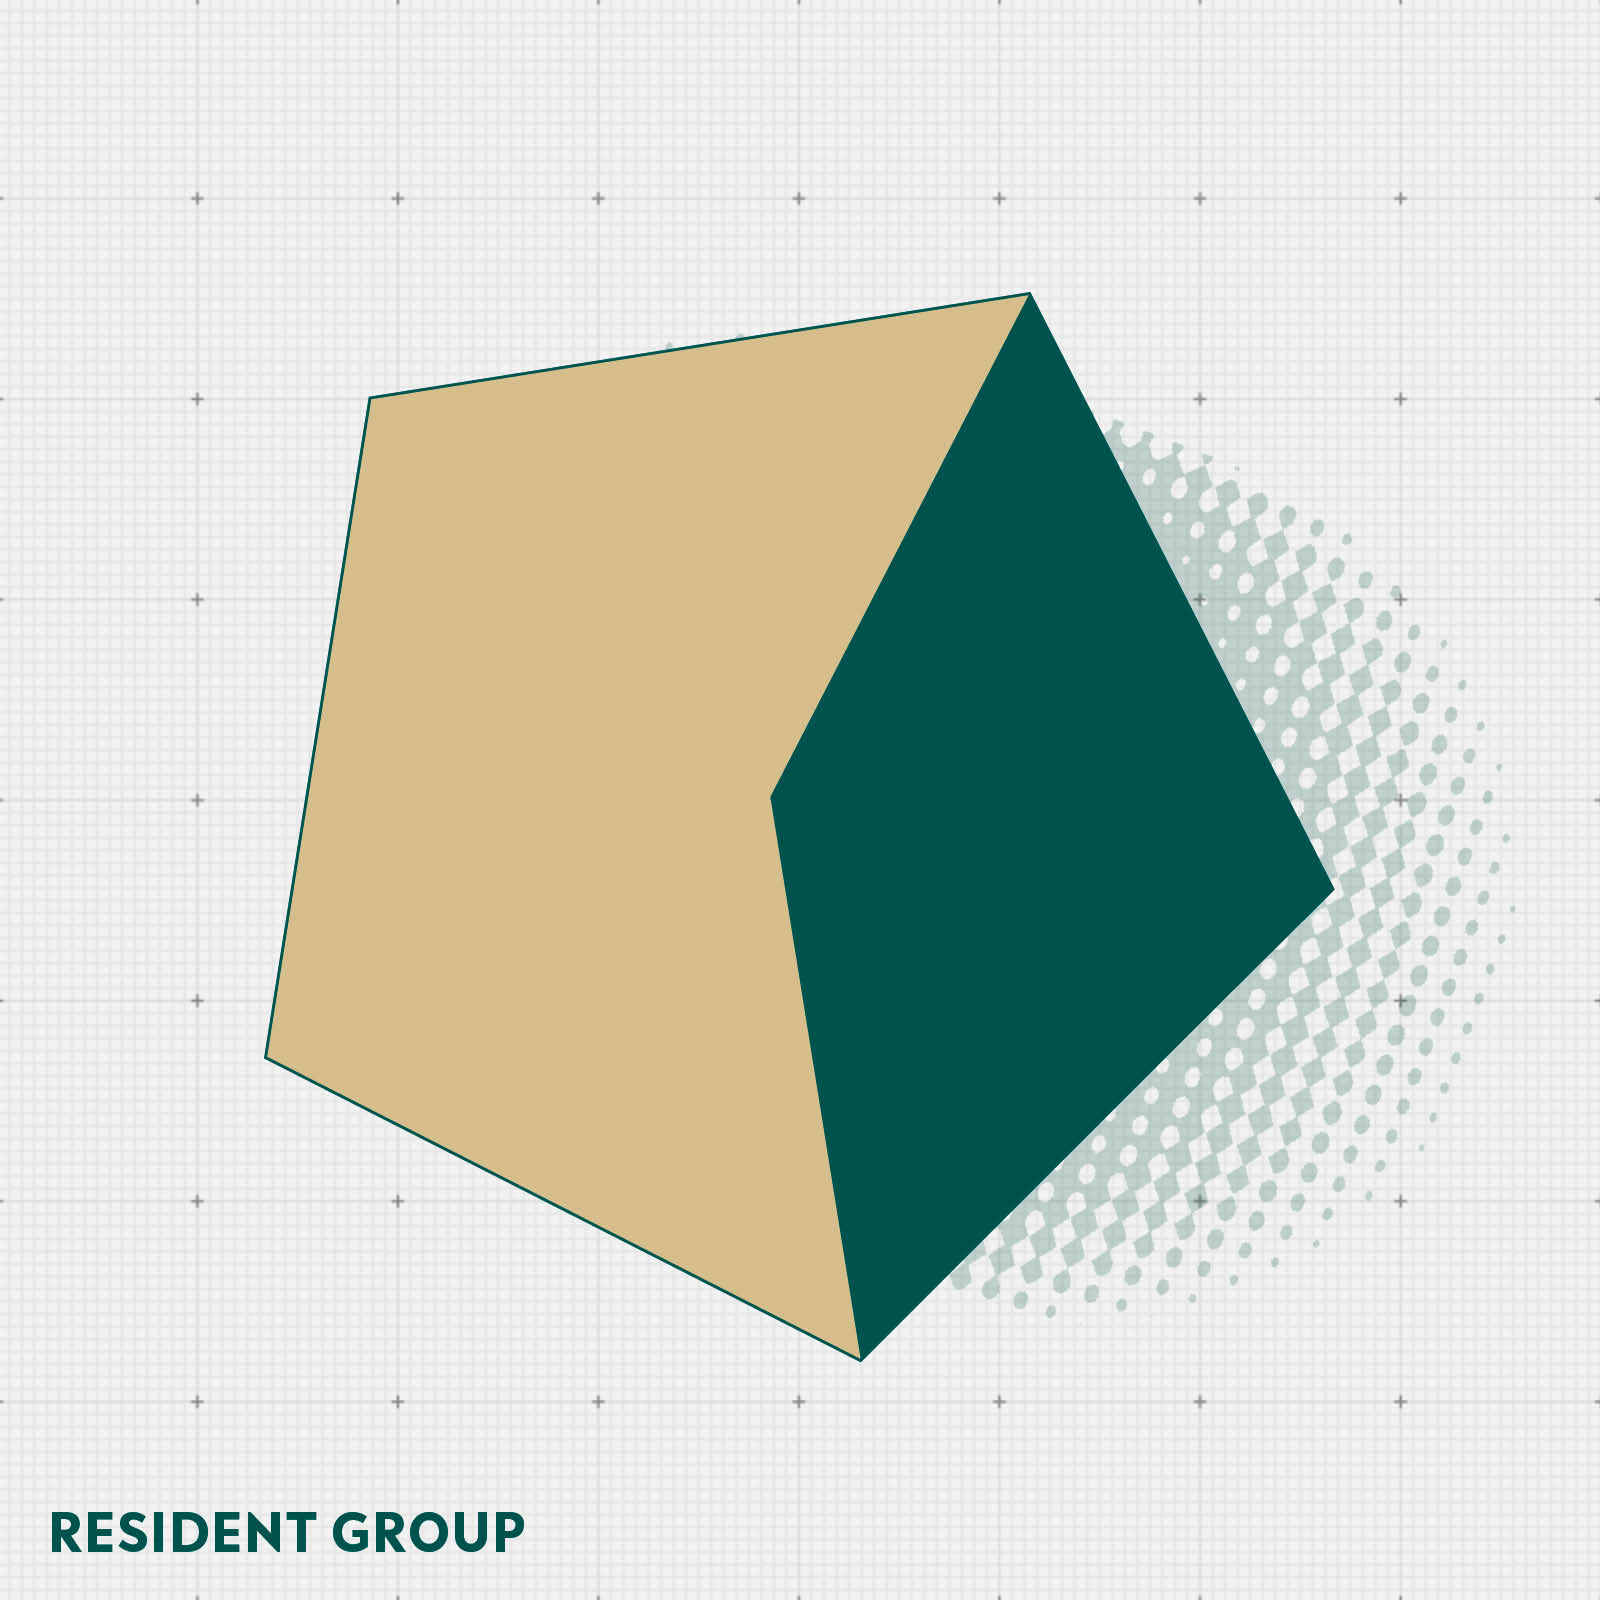 Graphic: a wood colored pentagon with green area on it, representing the length of a Resident Group